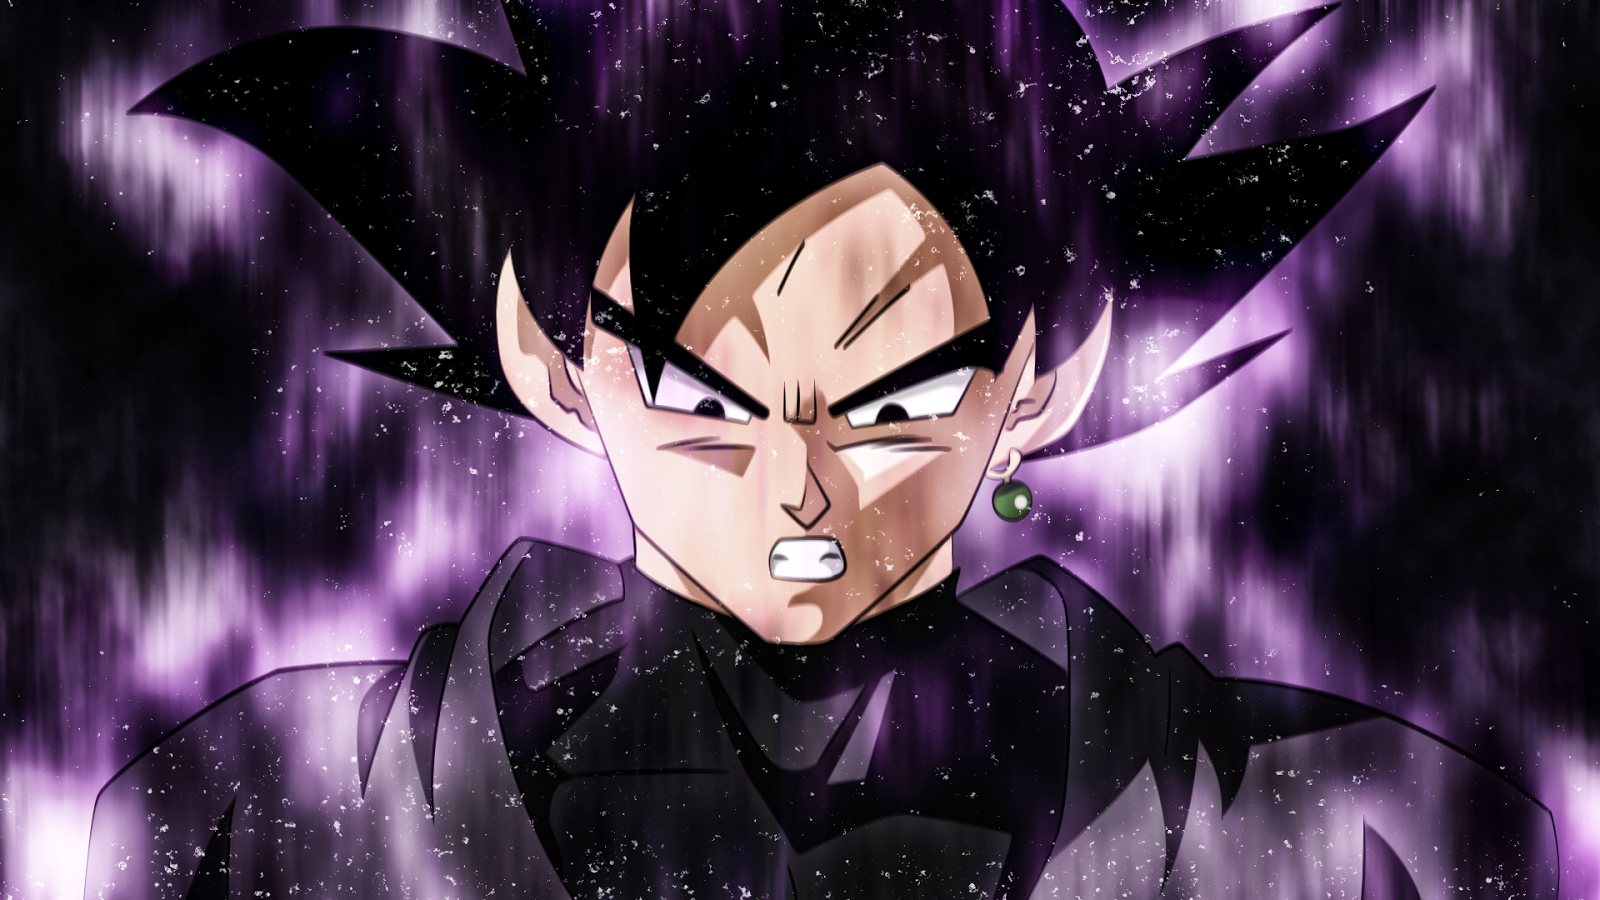 BLACK GOKU WALLPAPERS & PICTURE